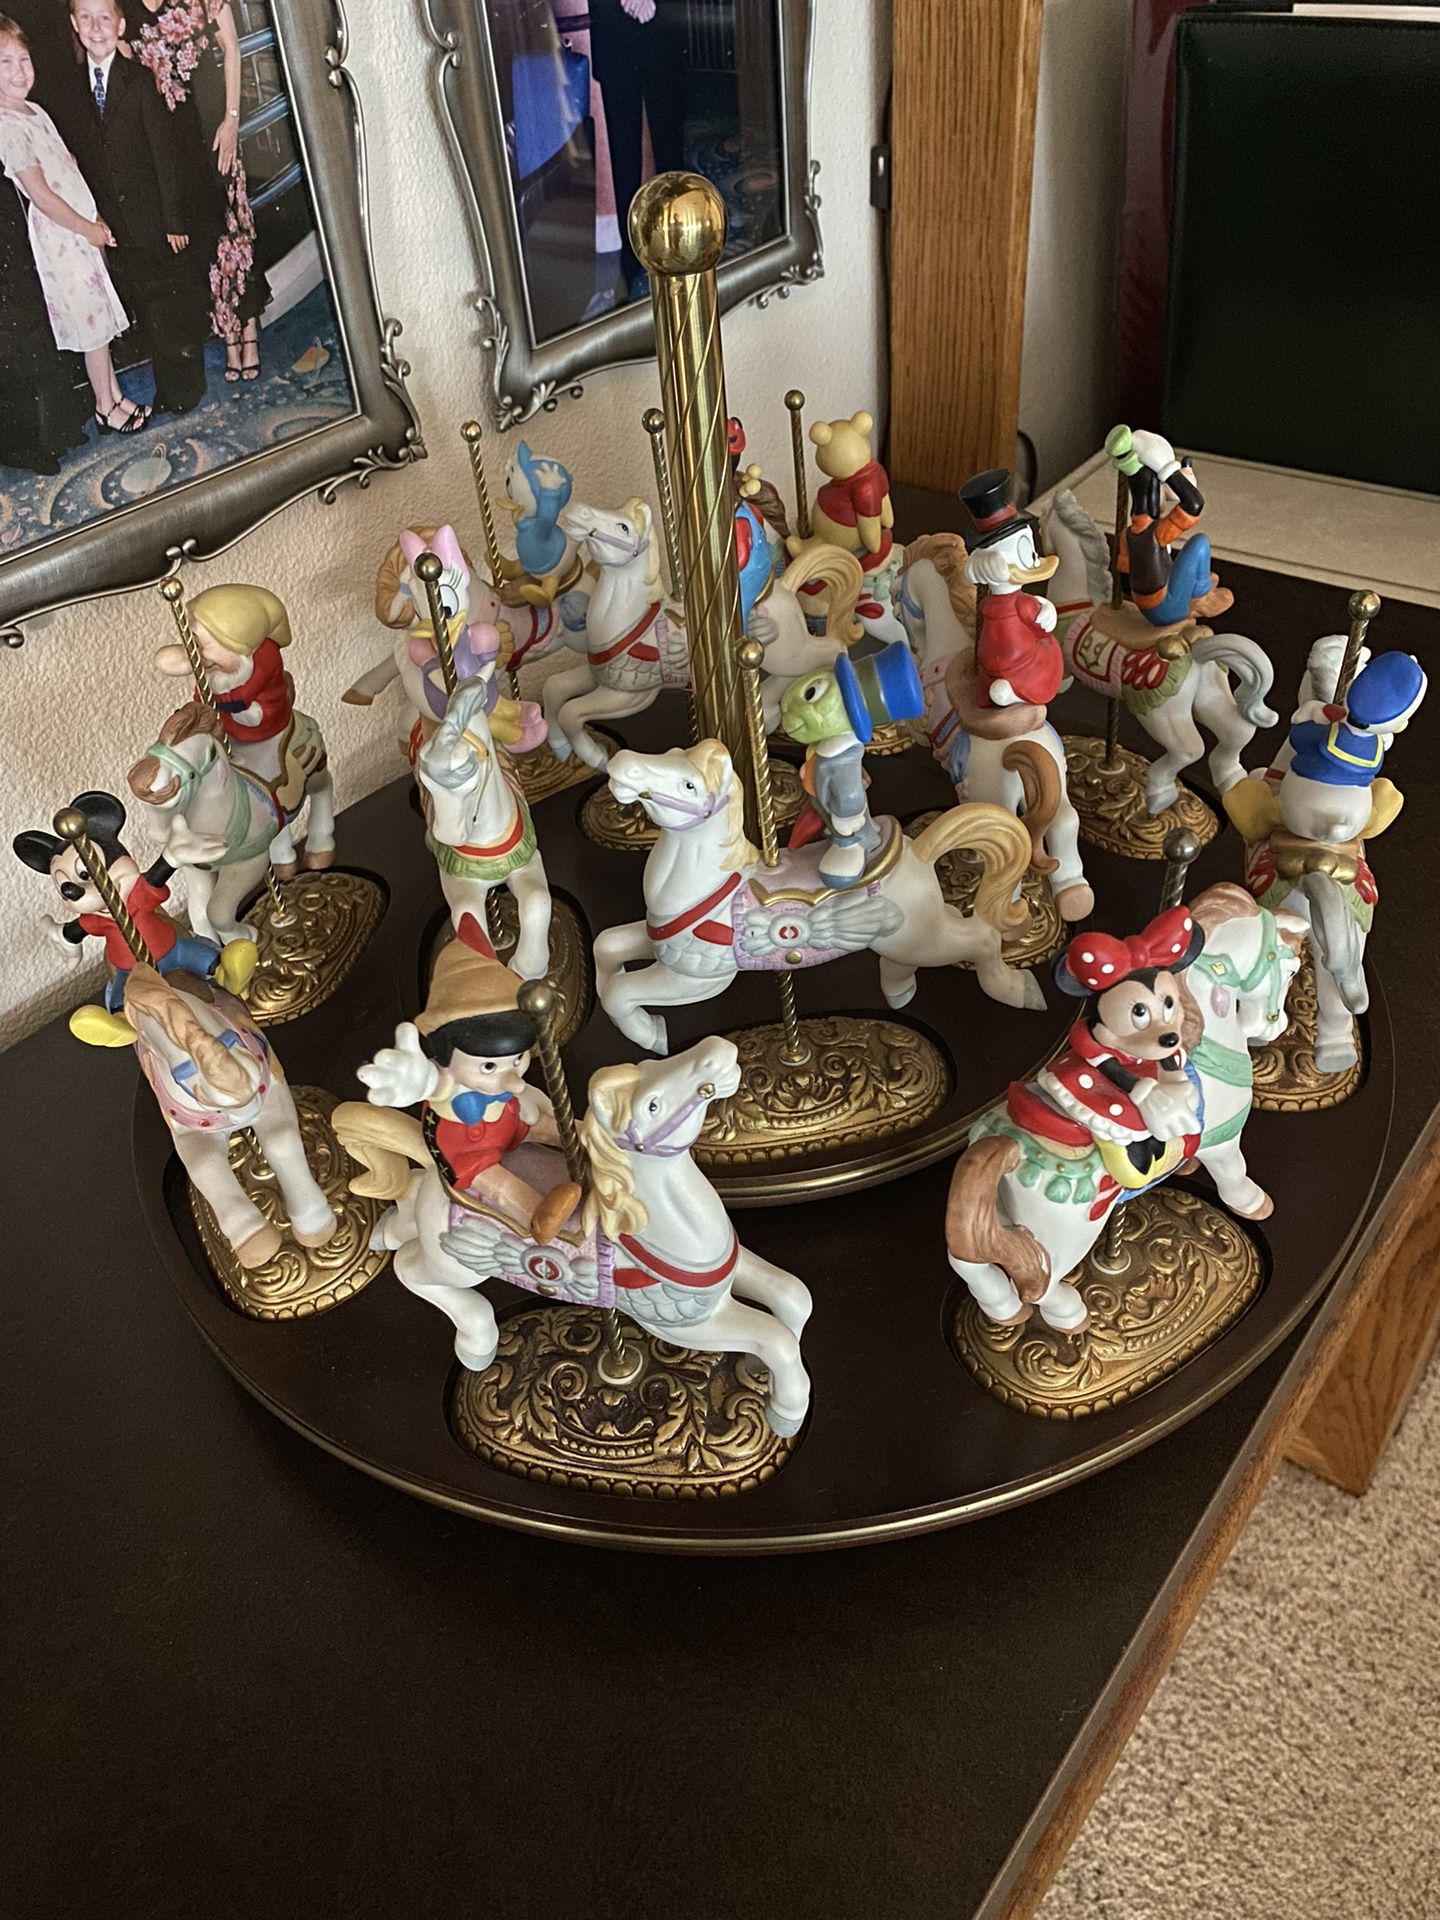 The Disney Characters Carousel 9500 Limited Edition by The New England Collectors Society